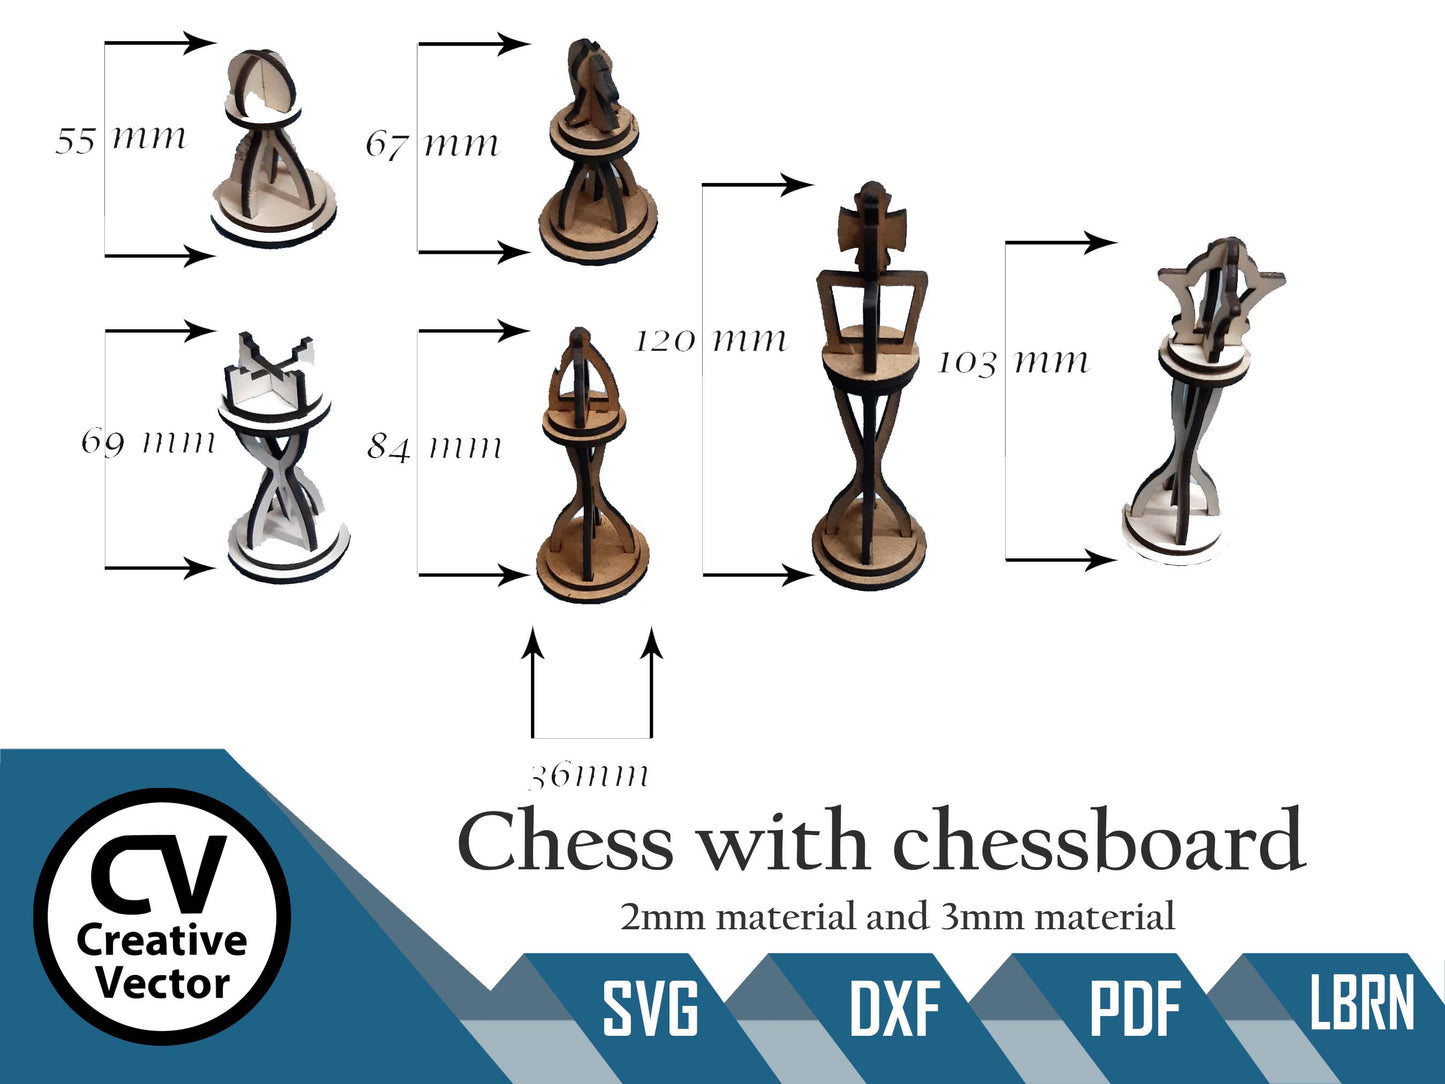 Chess with chessboard vol.1